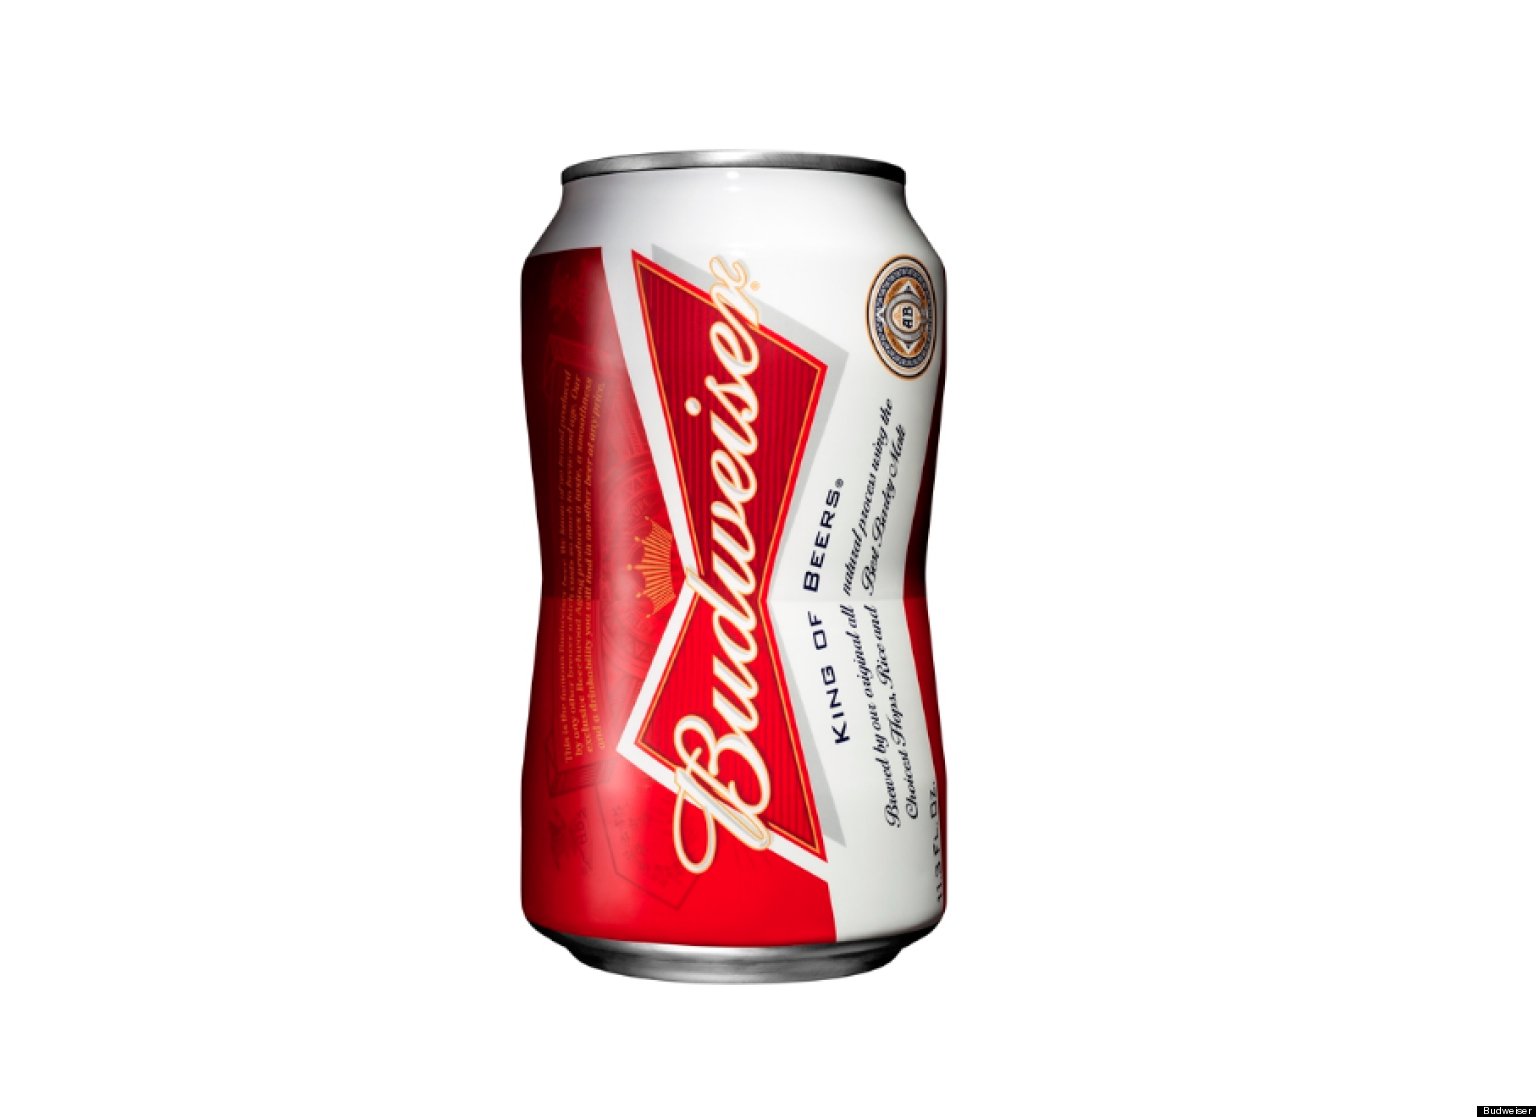 Budweiser Bow Tie Can To Debut On May 6 (PHOTOS) | HuffPost